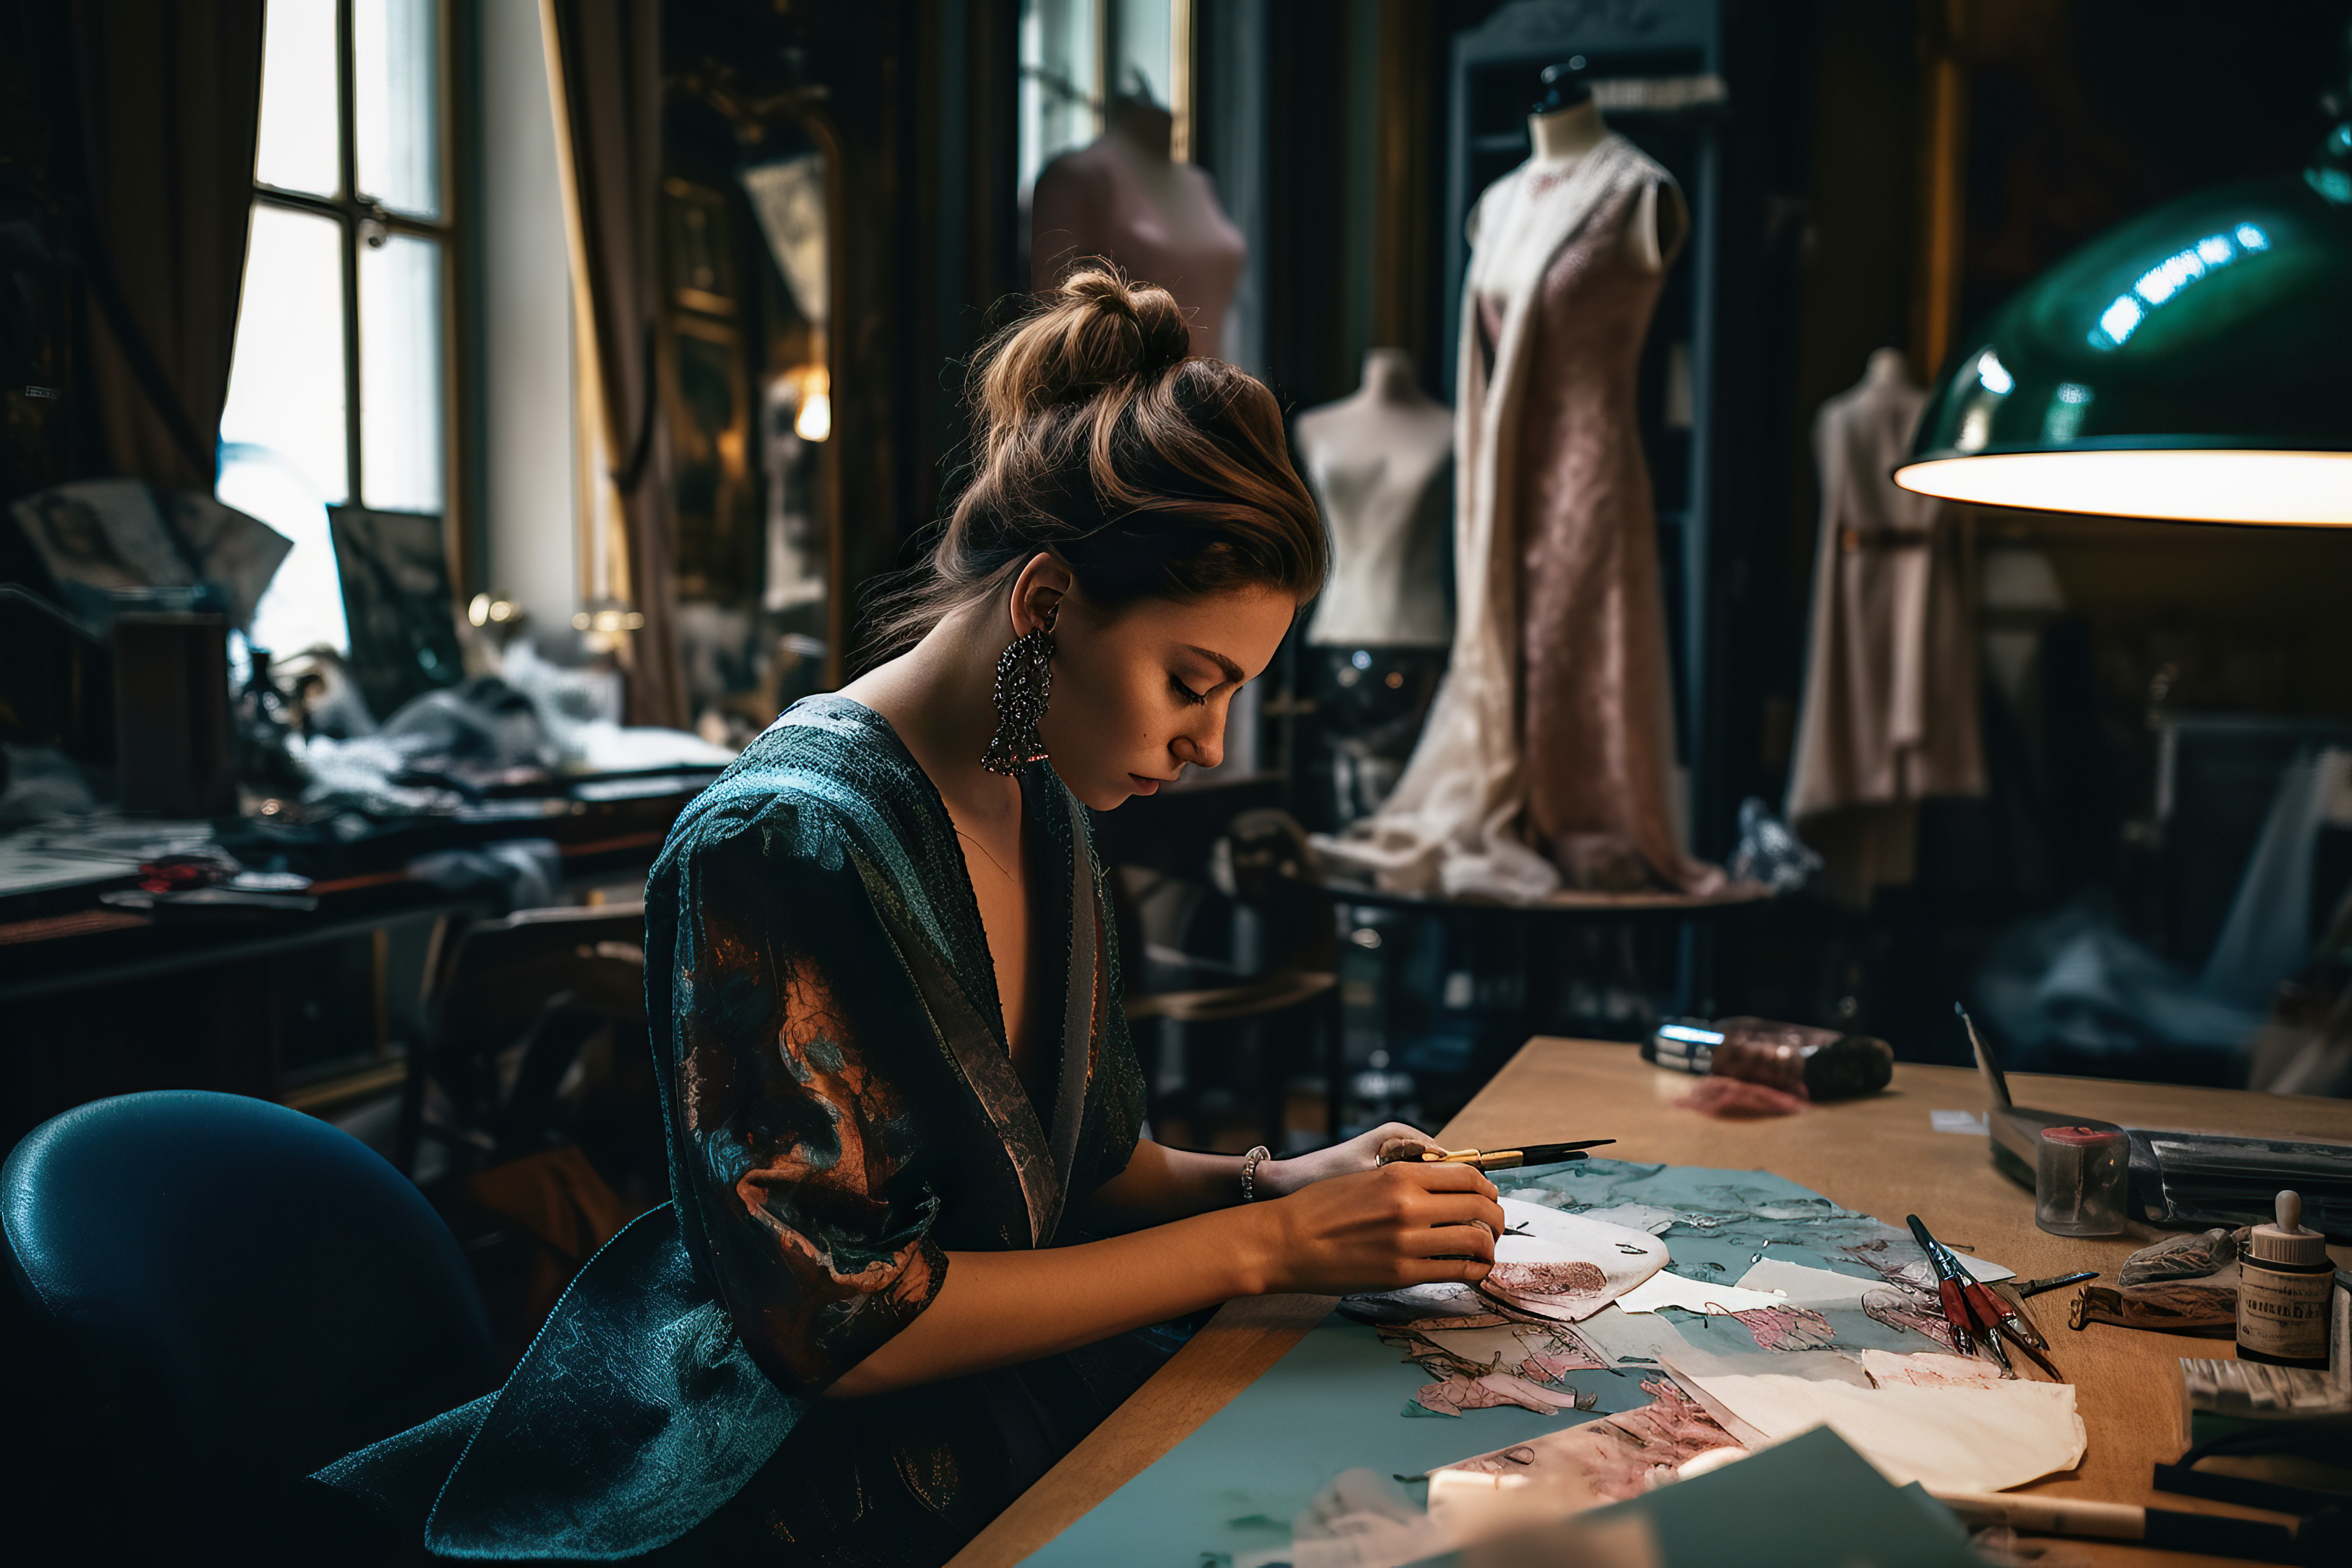 Accomplished fashion designer sketching out new designs in her atelier